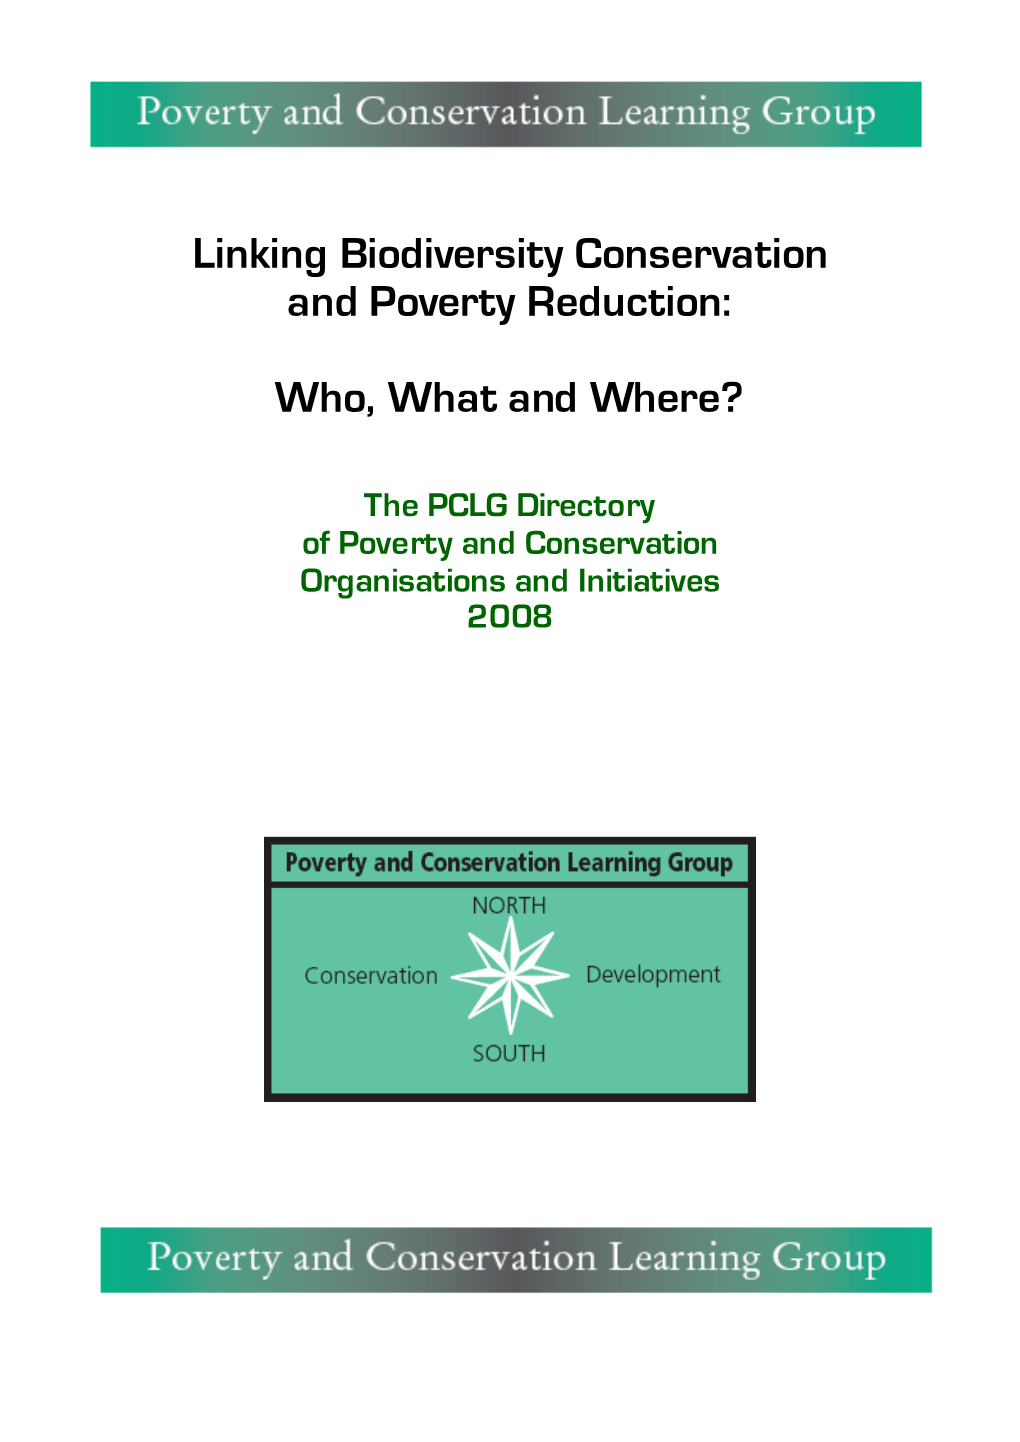 Linking Biodiversity Conservation and Poverty Reduction: Who, What and Where? the PCLG Directory of Poverty and Conservation Organisations and Initiatives 2008